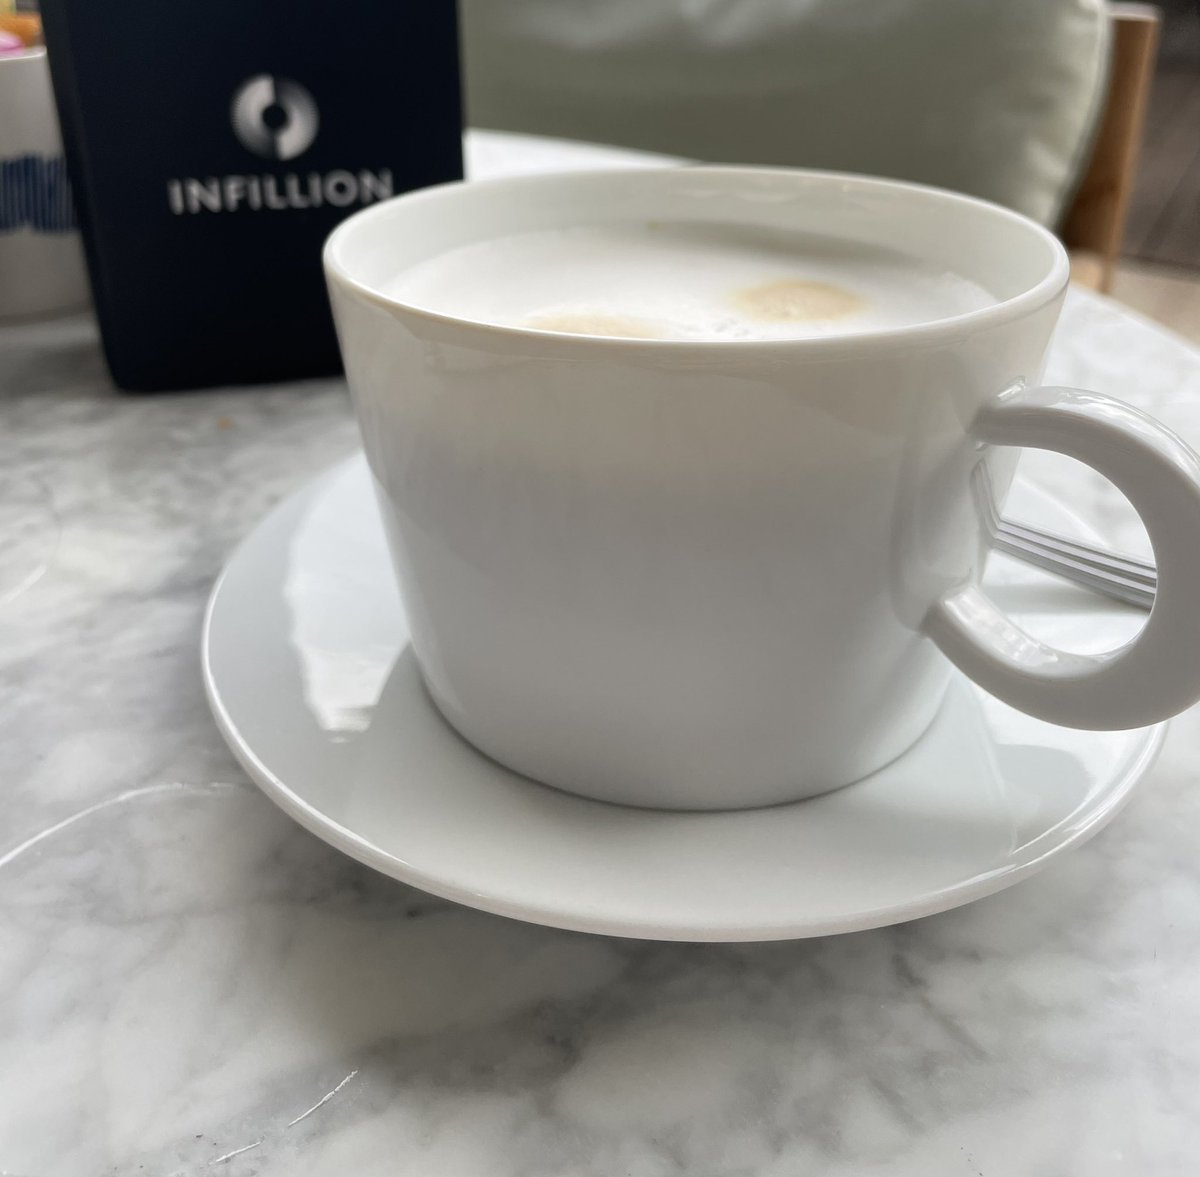 #CannesLions2023  Day FOUR! We are ready for you! Head over to the Inclusion Cafe this morning at the Mondrian Hotel for great conversations, panels, and of course - breakfast and coffee! 
For all of the details: bit.ly/42EeUiY

#InfillionAtCannes #inclusion #media